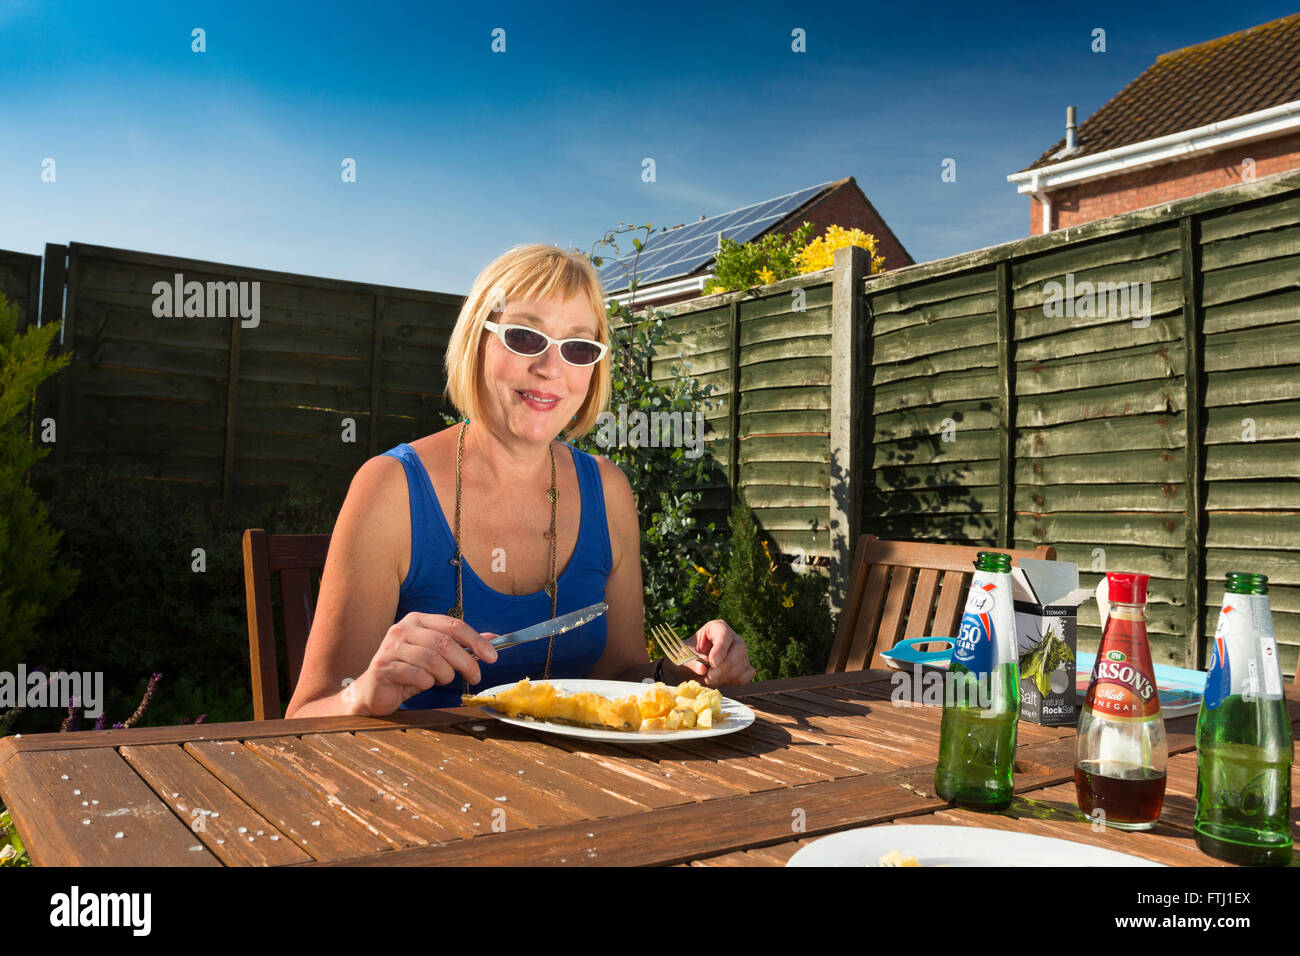 woman eating meal outdoors at home Stock Photo